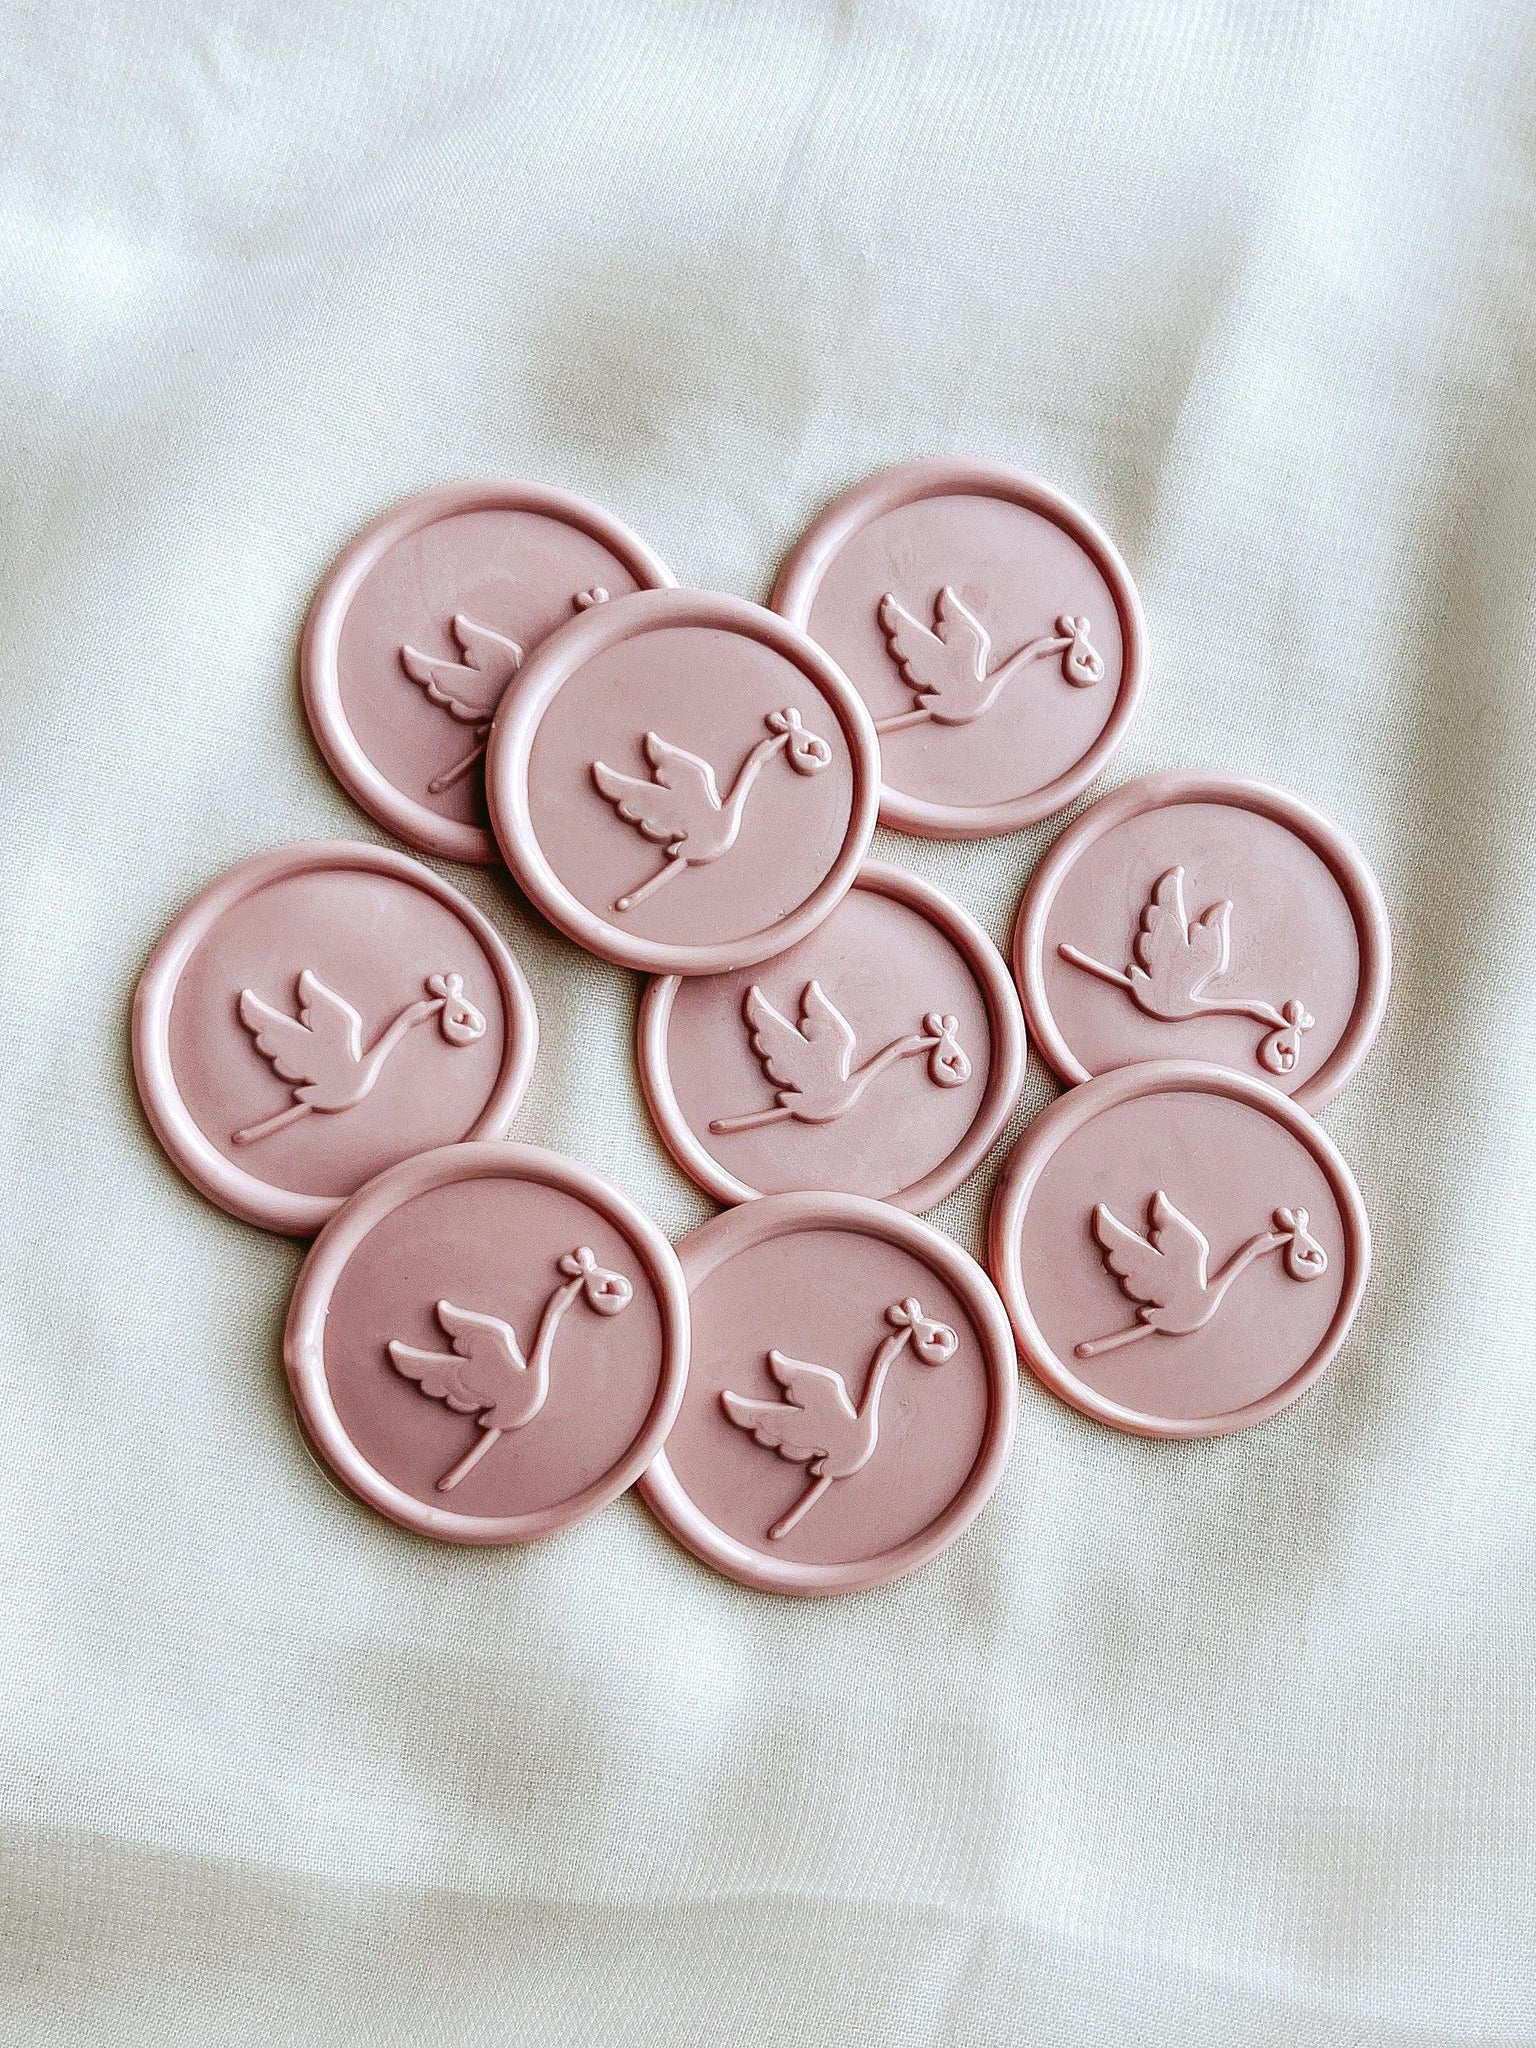 Stork wax seals - Set of 9 - Made of Honour Co.